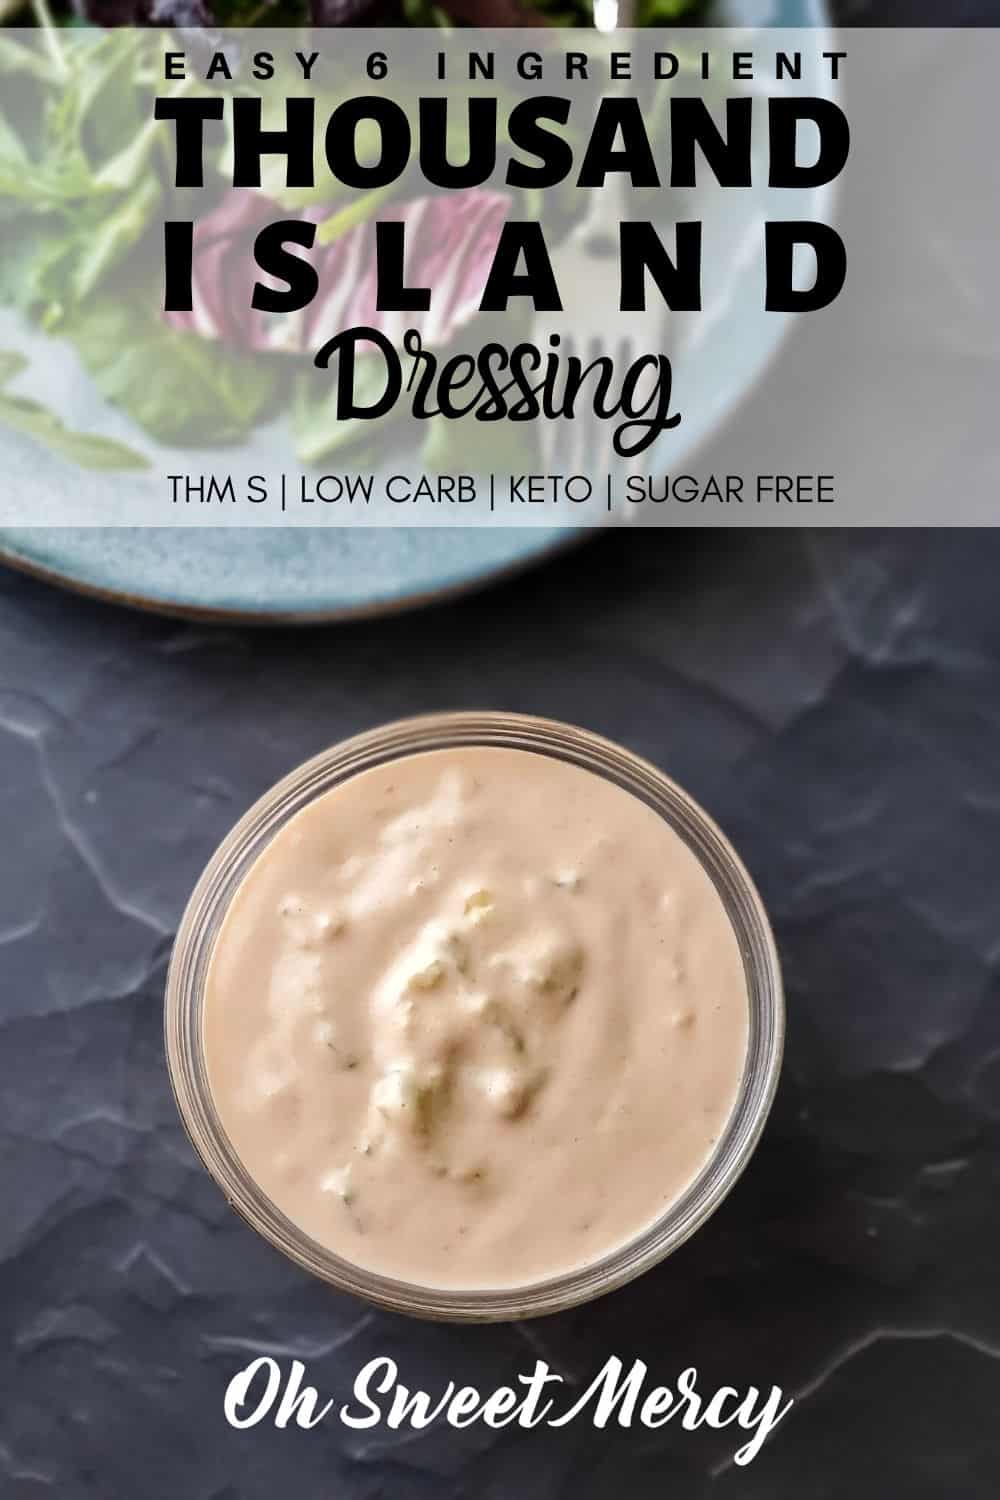 Easy, 6 Ingredient Low Carb Thousand Island Dressing is perfect for salads, sandwiches and more. Make it with ingredients you probably already have in your fridge and pantry. THM S, keto, and sugar free! #thm #lowcarb #keto #sugarfree #saladdressing #1000island